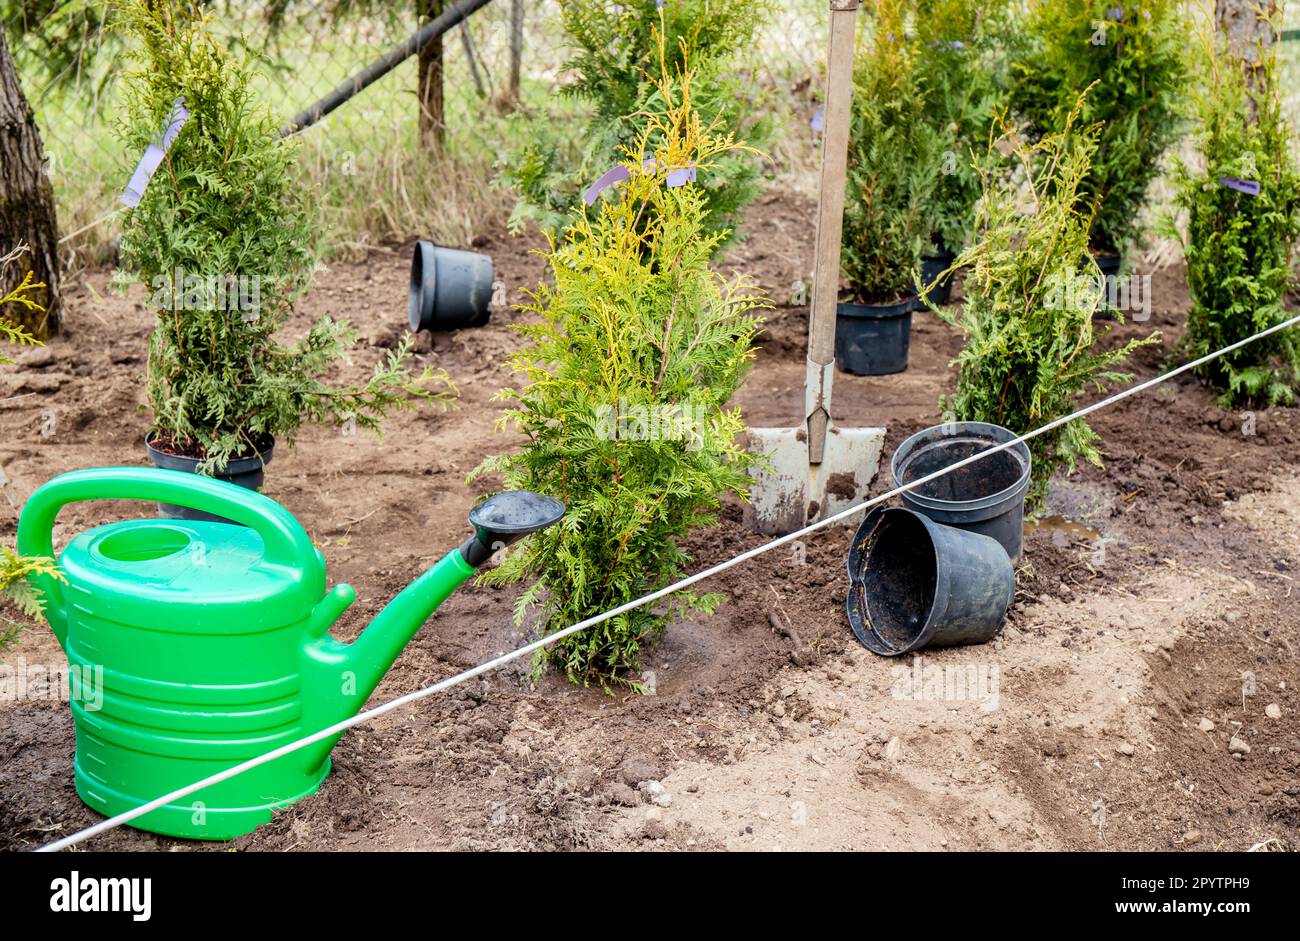 Planting Thuja occidentalis tree of life hedge in home garden soil outdoors in spring. Work in progress, watering can, shovel and empty flower pots. Stock Photo